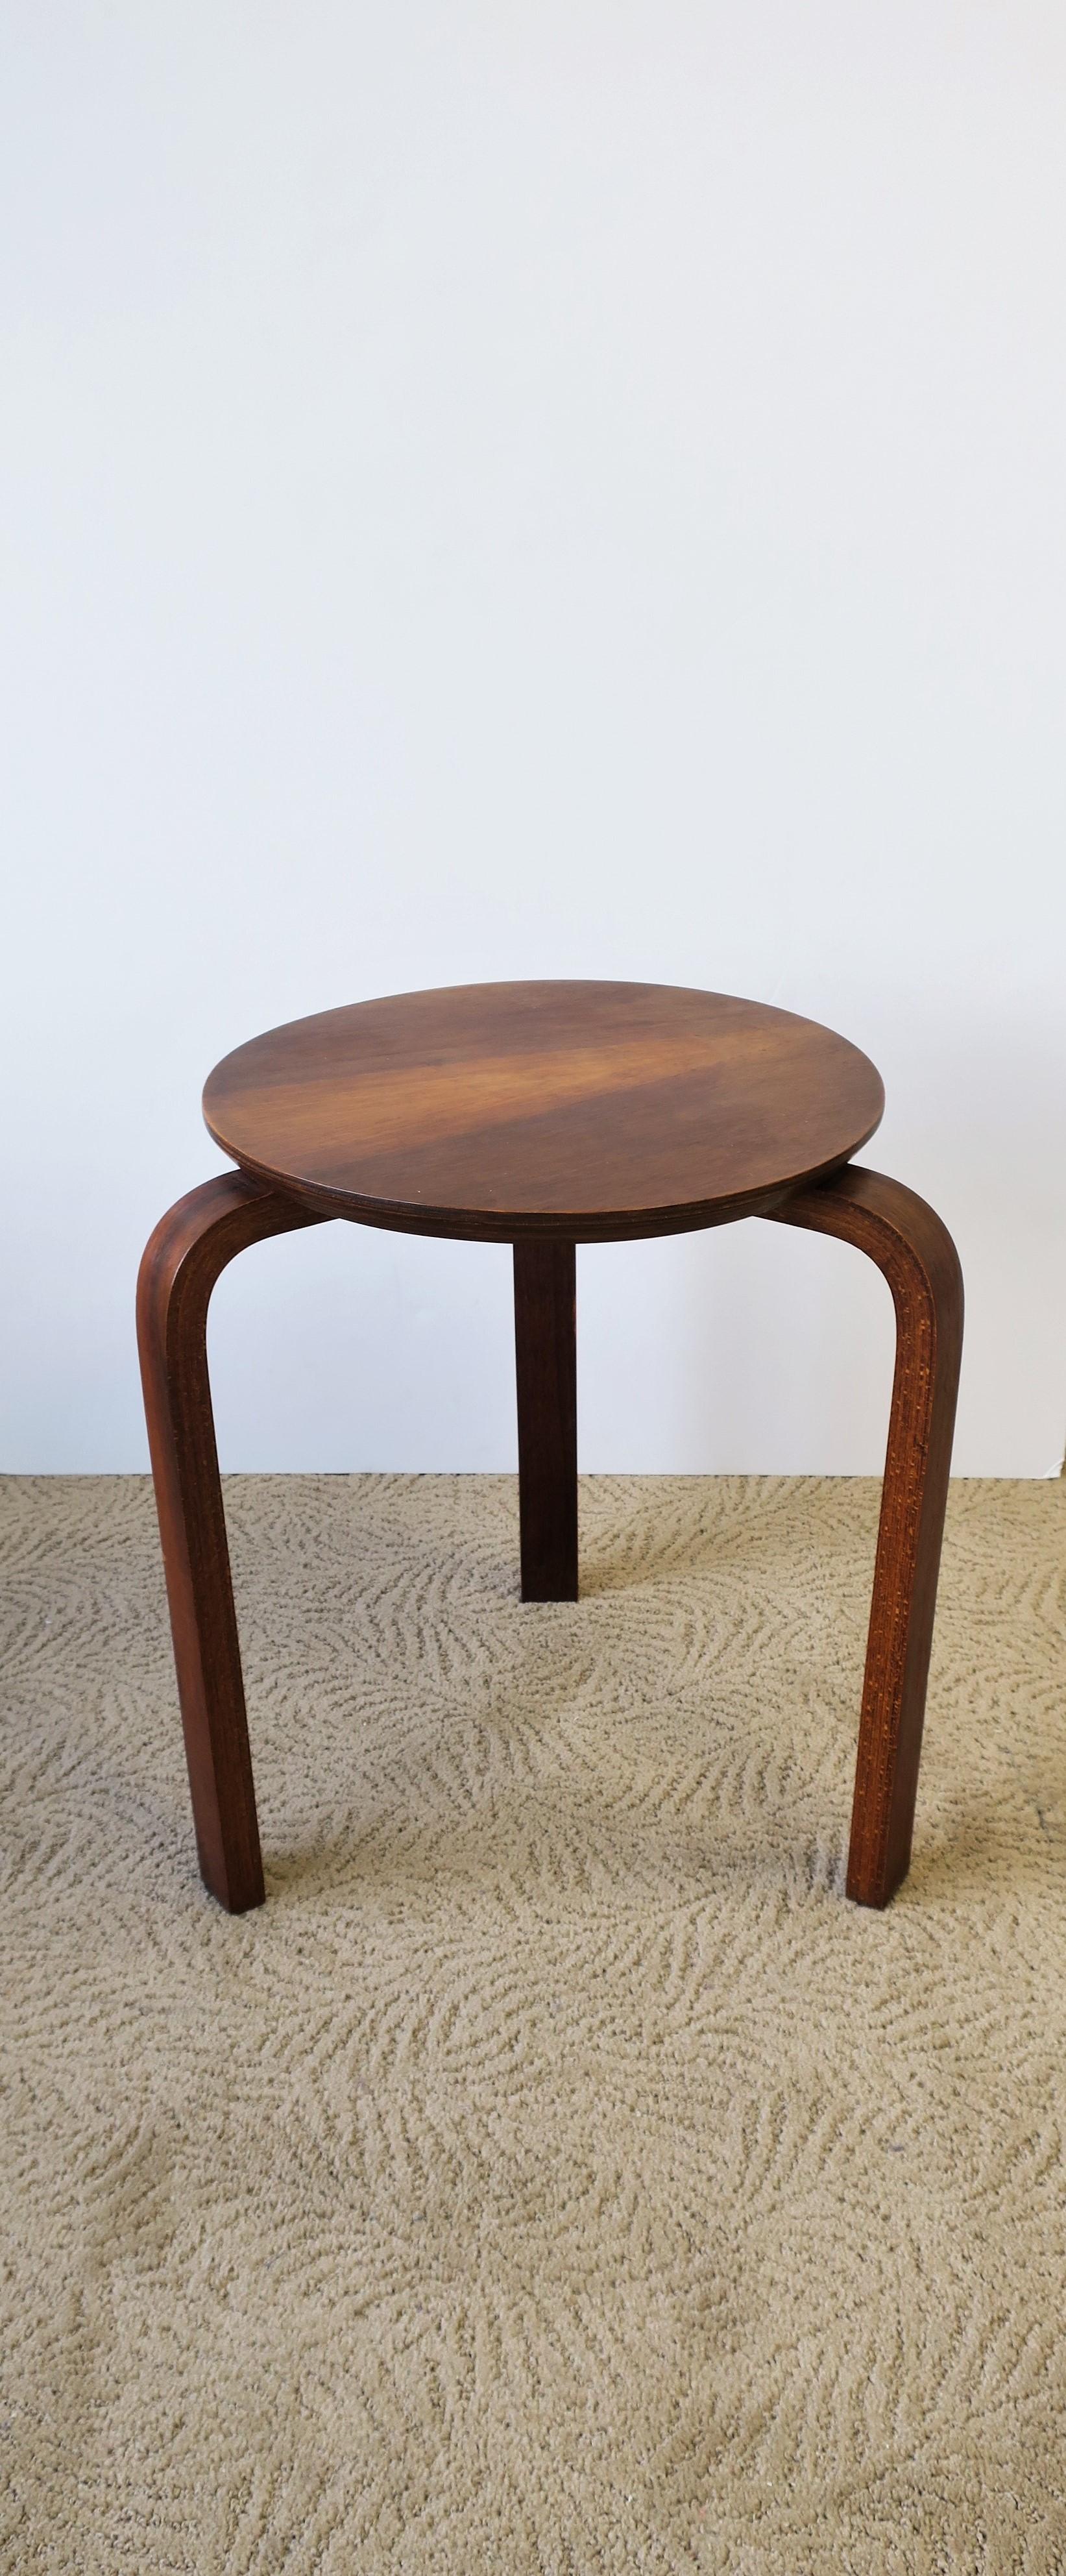 A rich modern European bentwood stool or drinks table, Midcentury Modern period, circa mid-20th century, Yugoslavia. Marked 